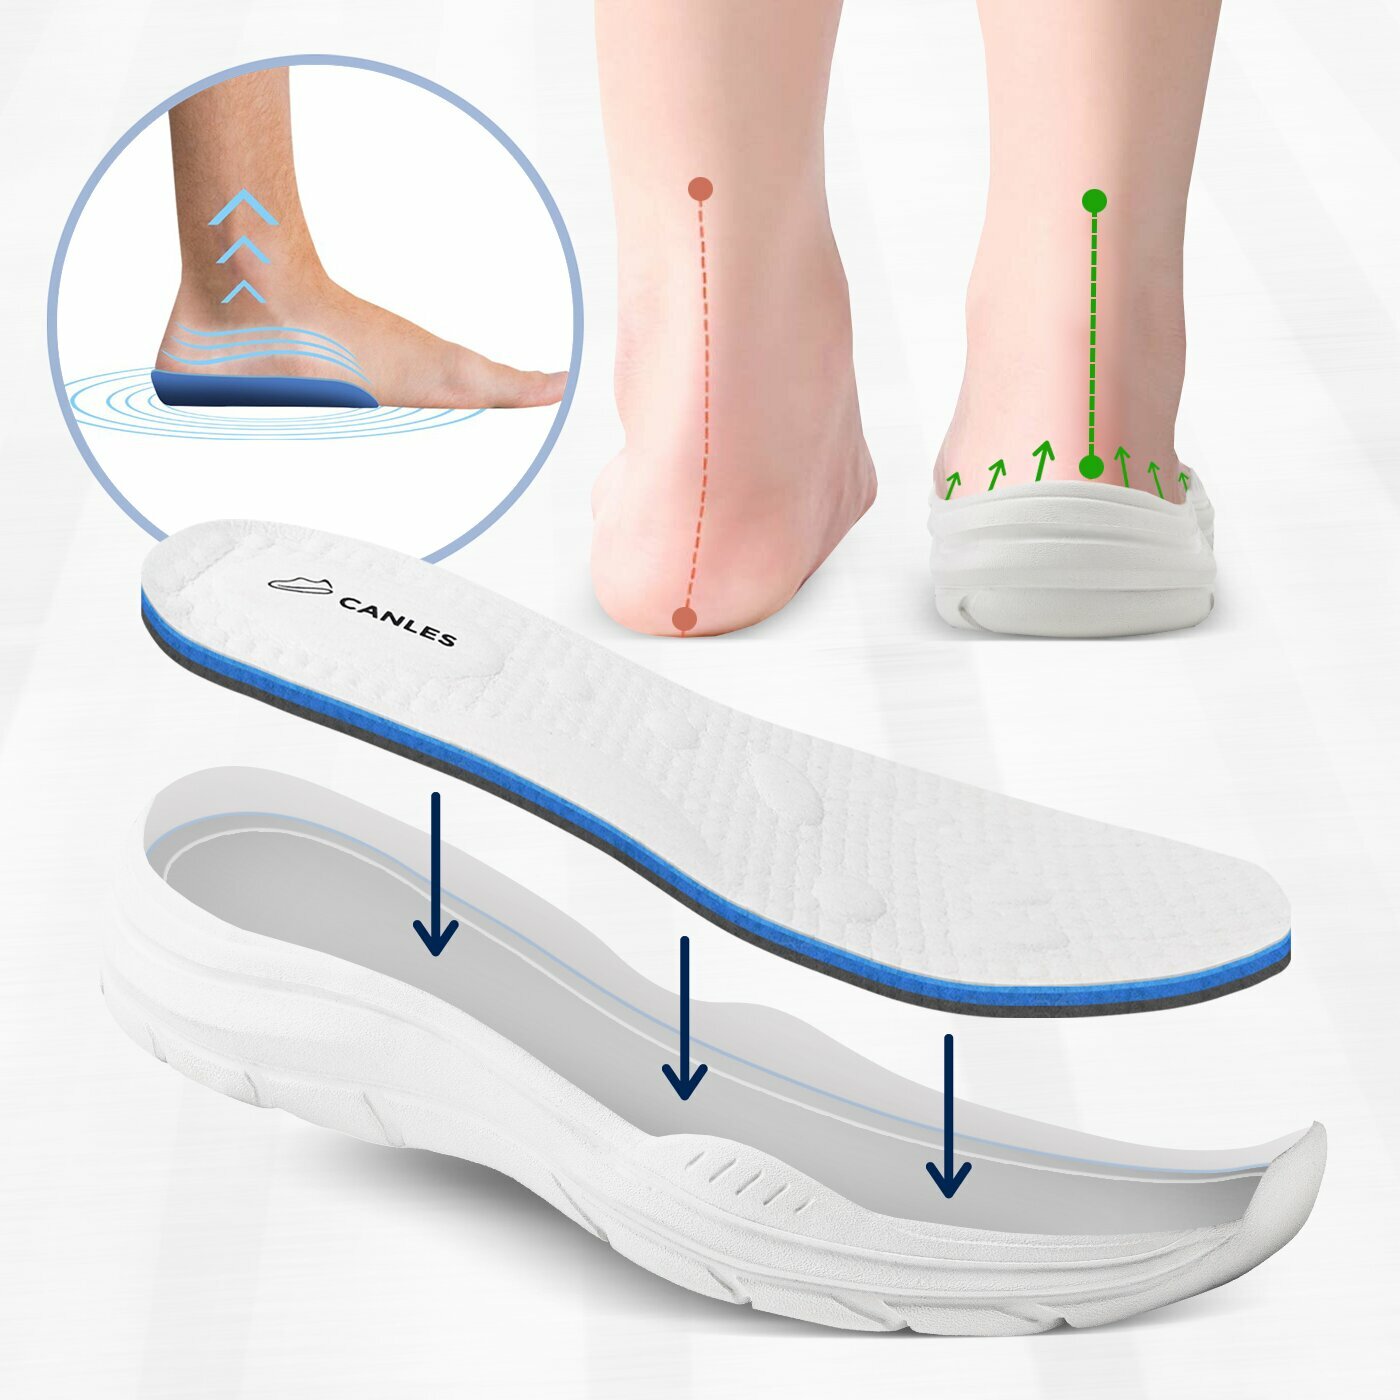 Canles - Say Goodbye To Foot Fatigue In Just 10 Minutes! Advertorial